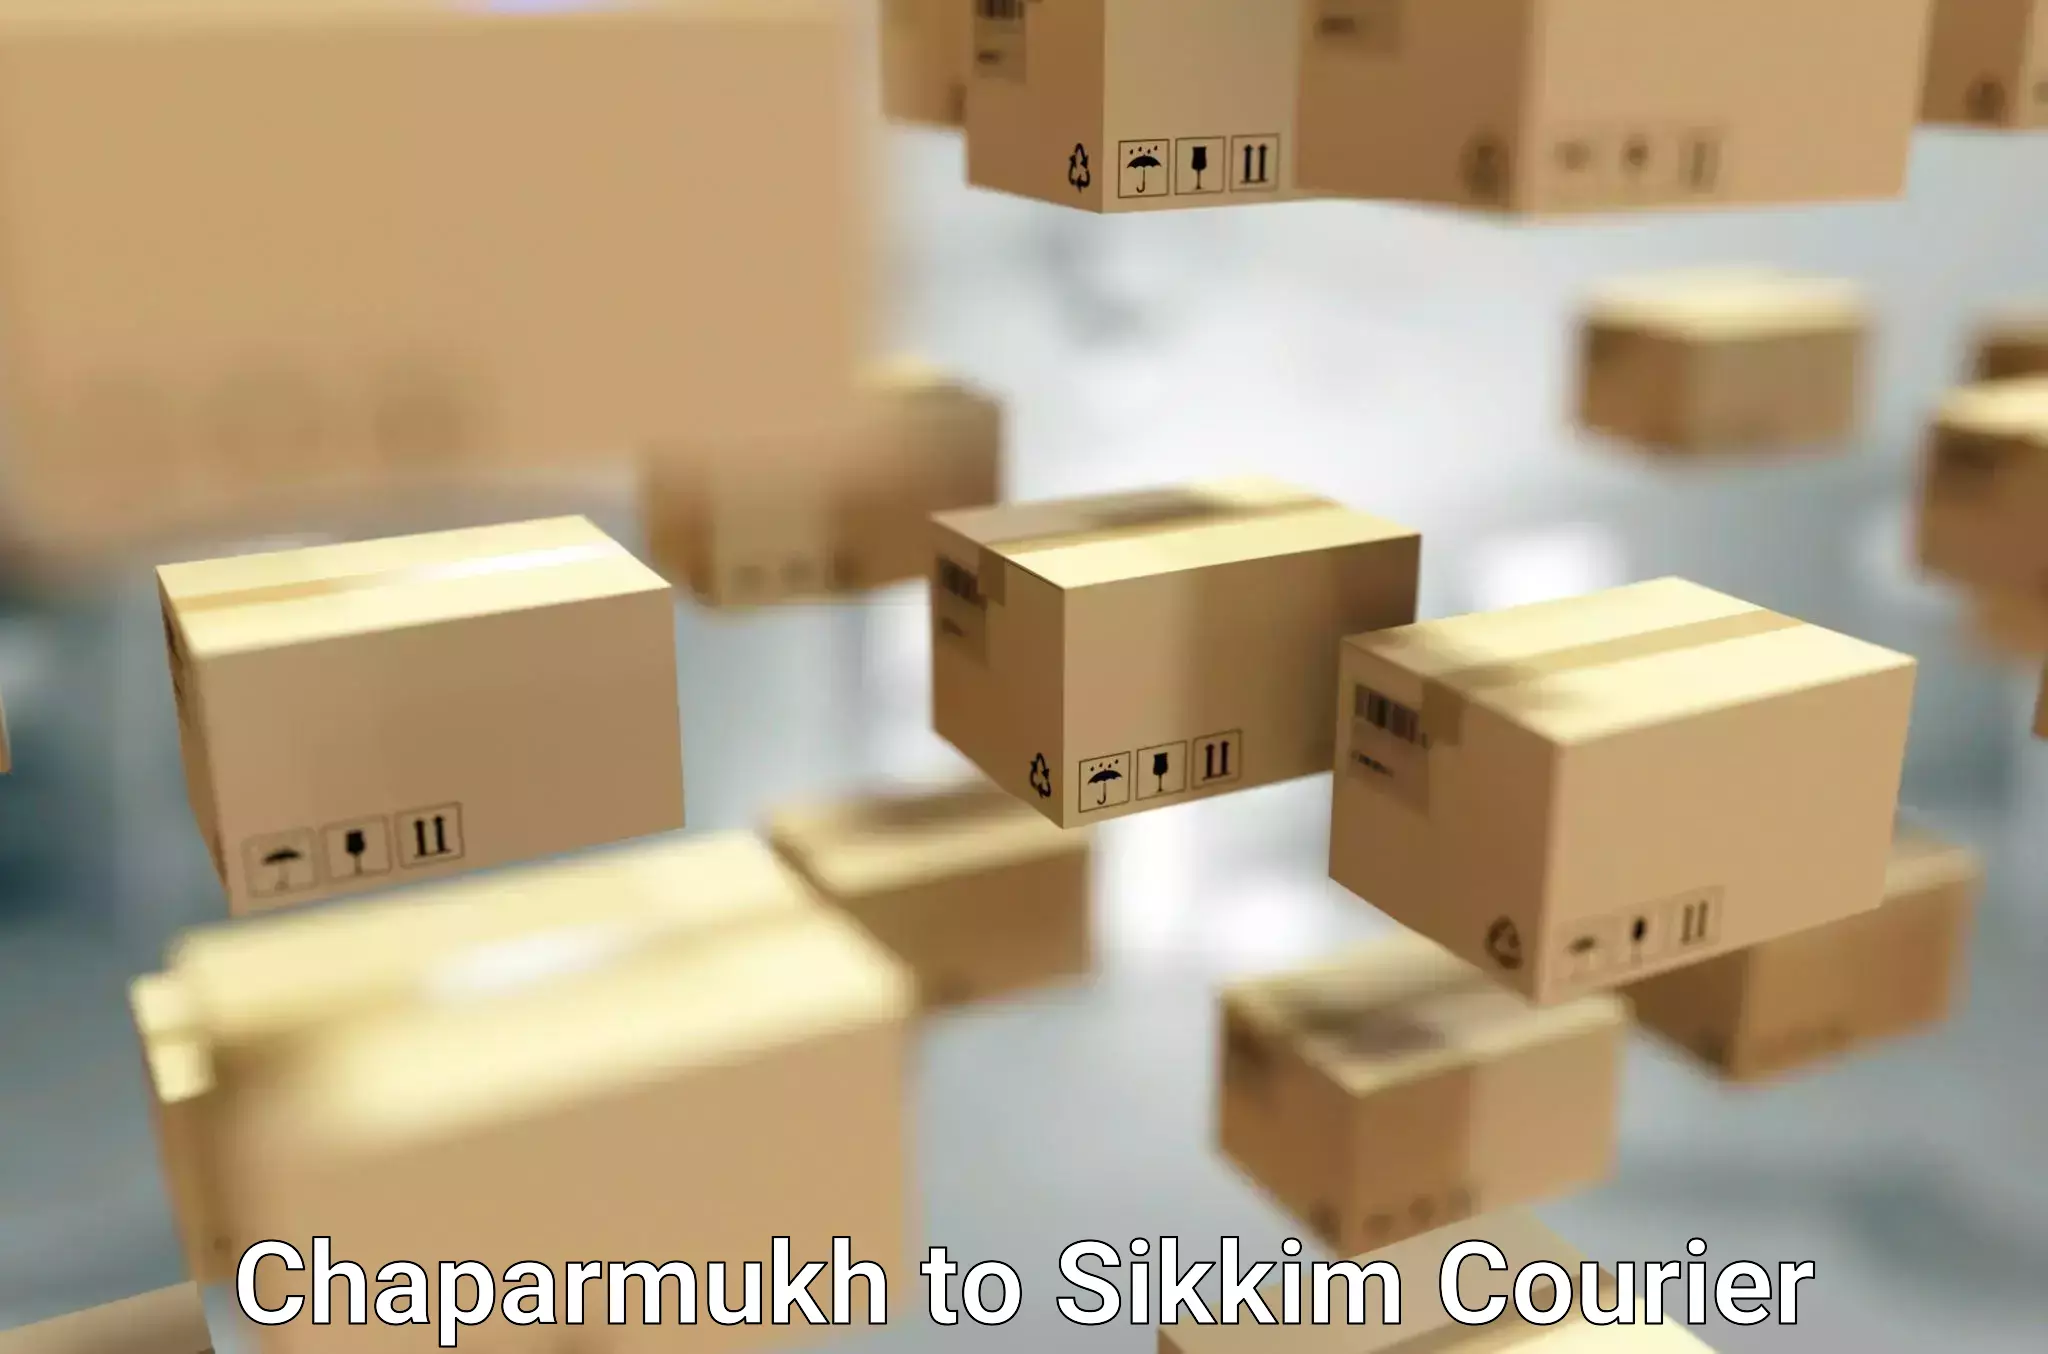 Efficient moving company Chaparmukh to Sikkim